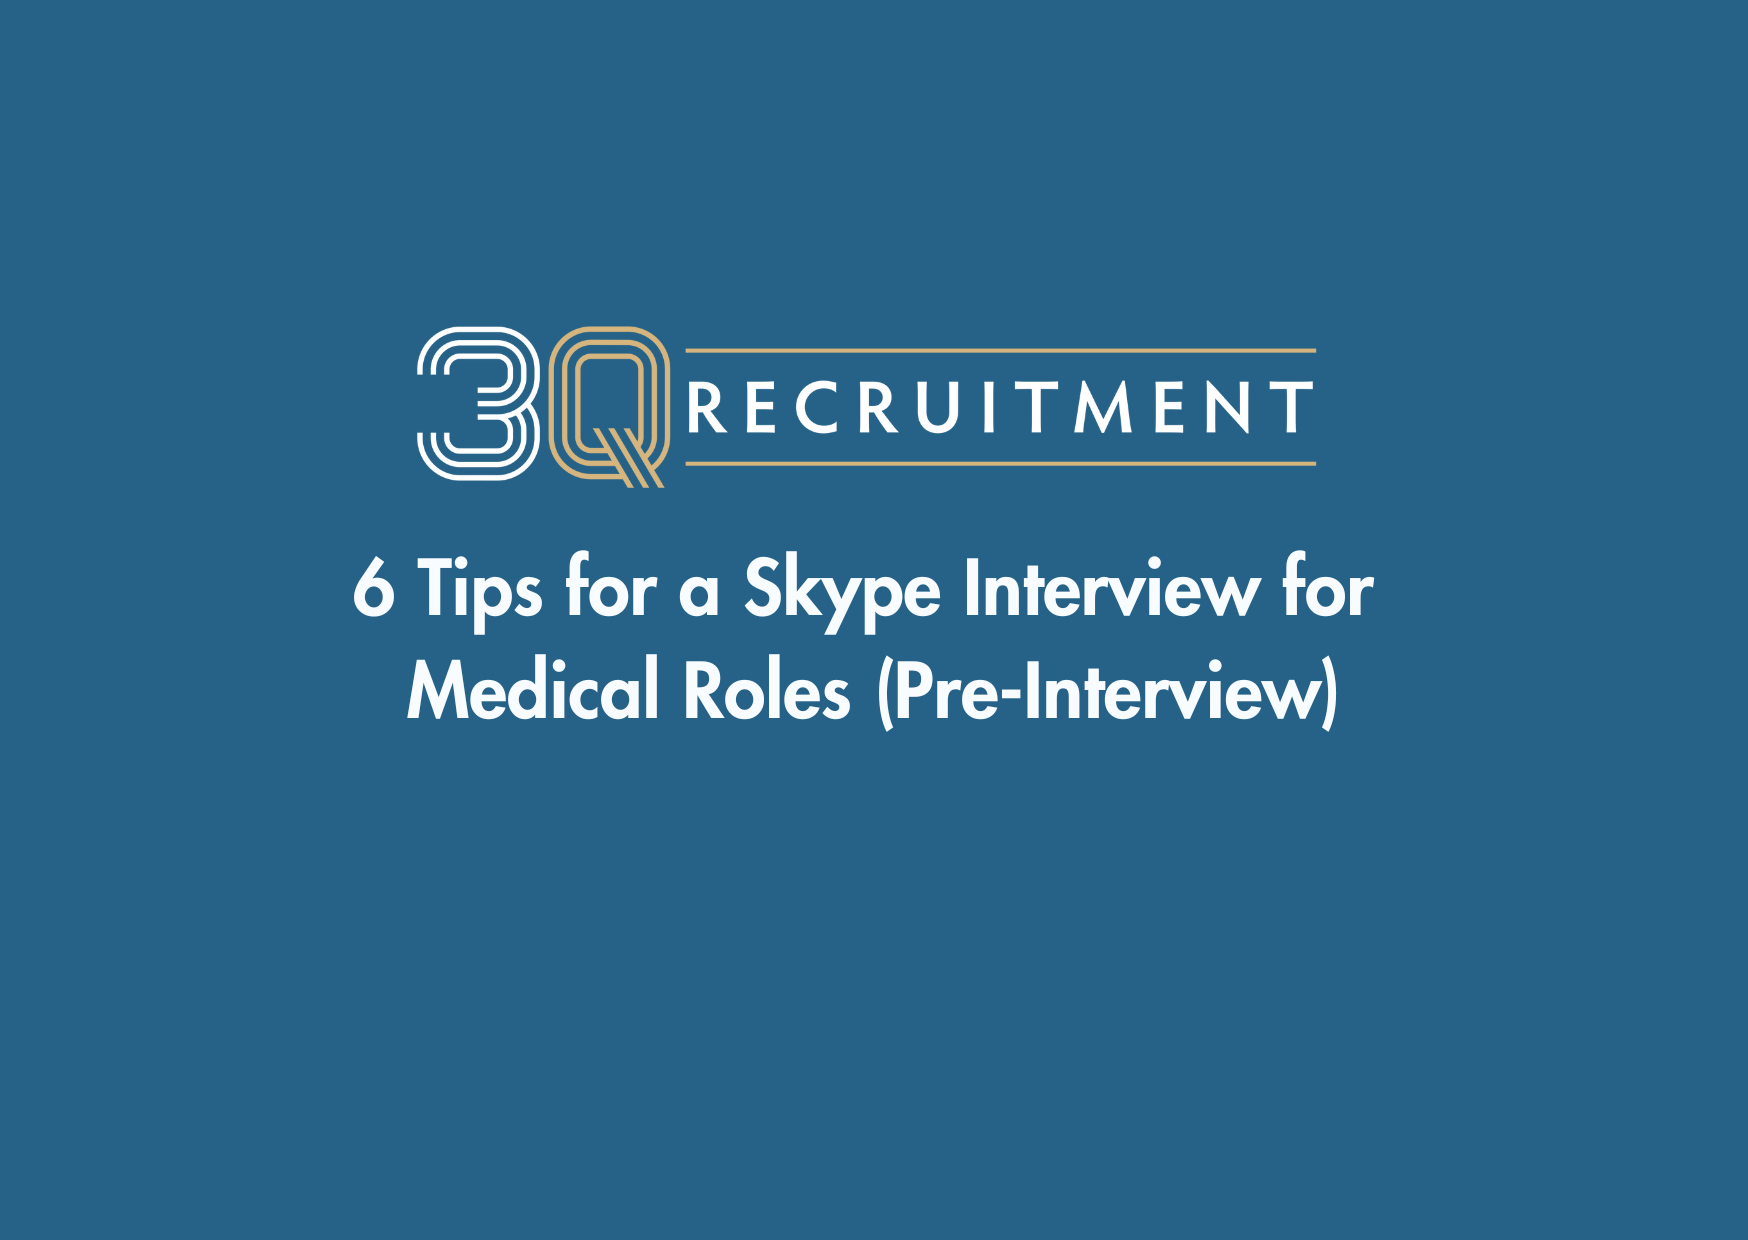 3Q Recruitment 6 Tips for a Skype Interview for Medical Roles (Pre-Interview)